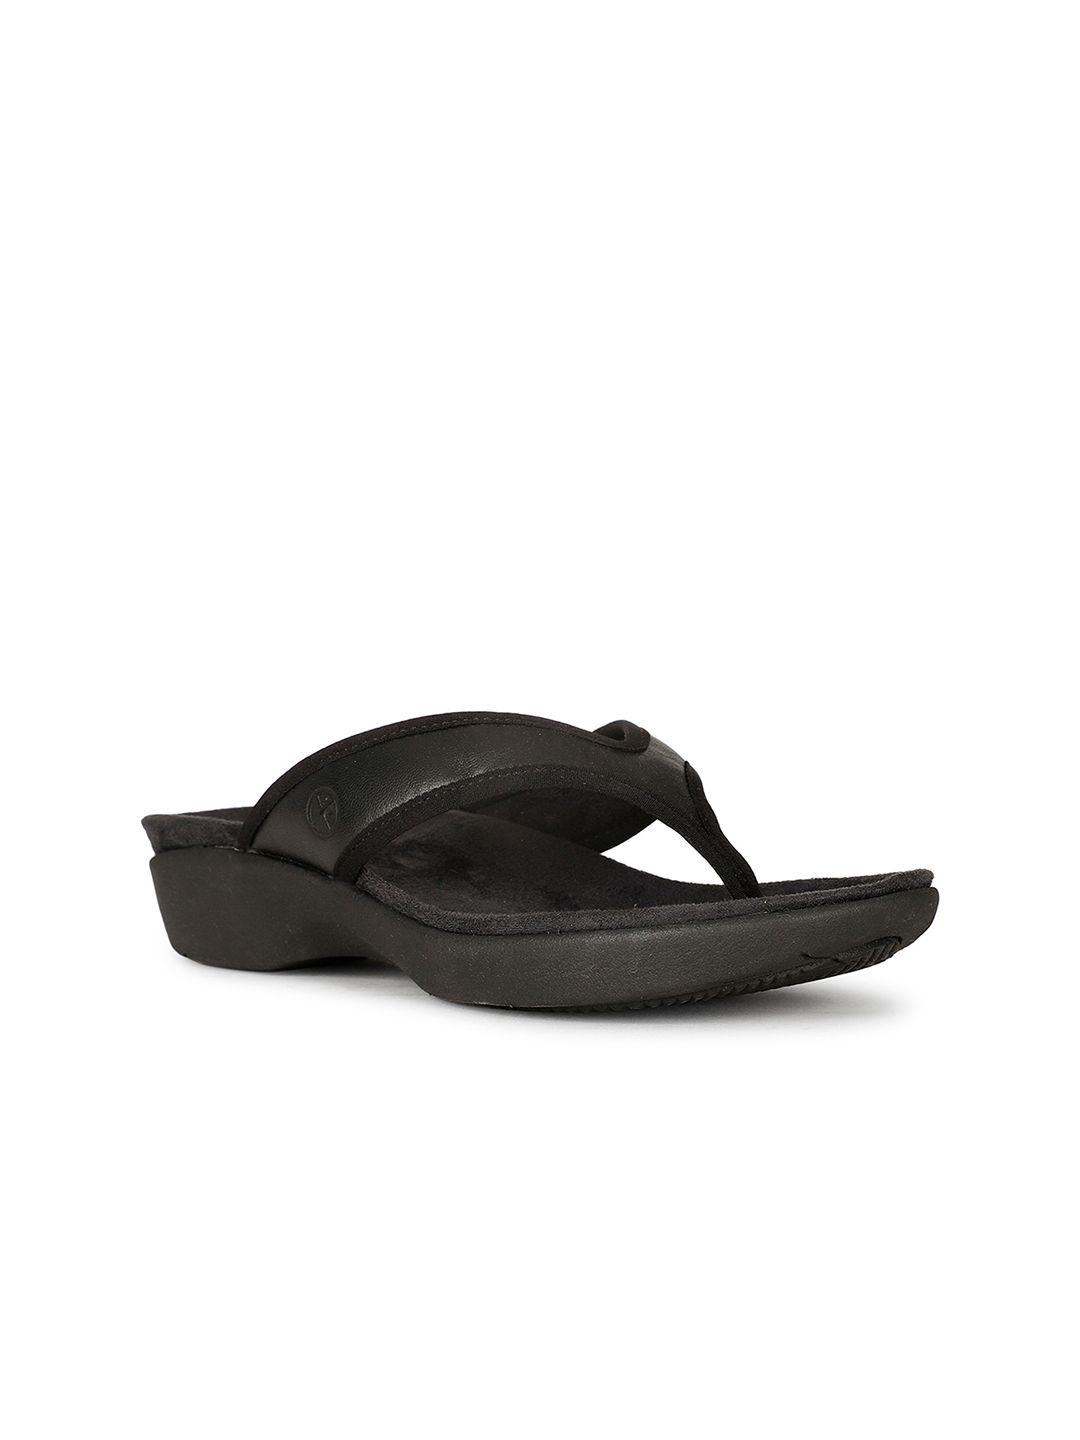 hush-puppies-thong-strap-leather-open-toe-flats